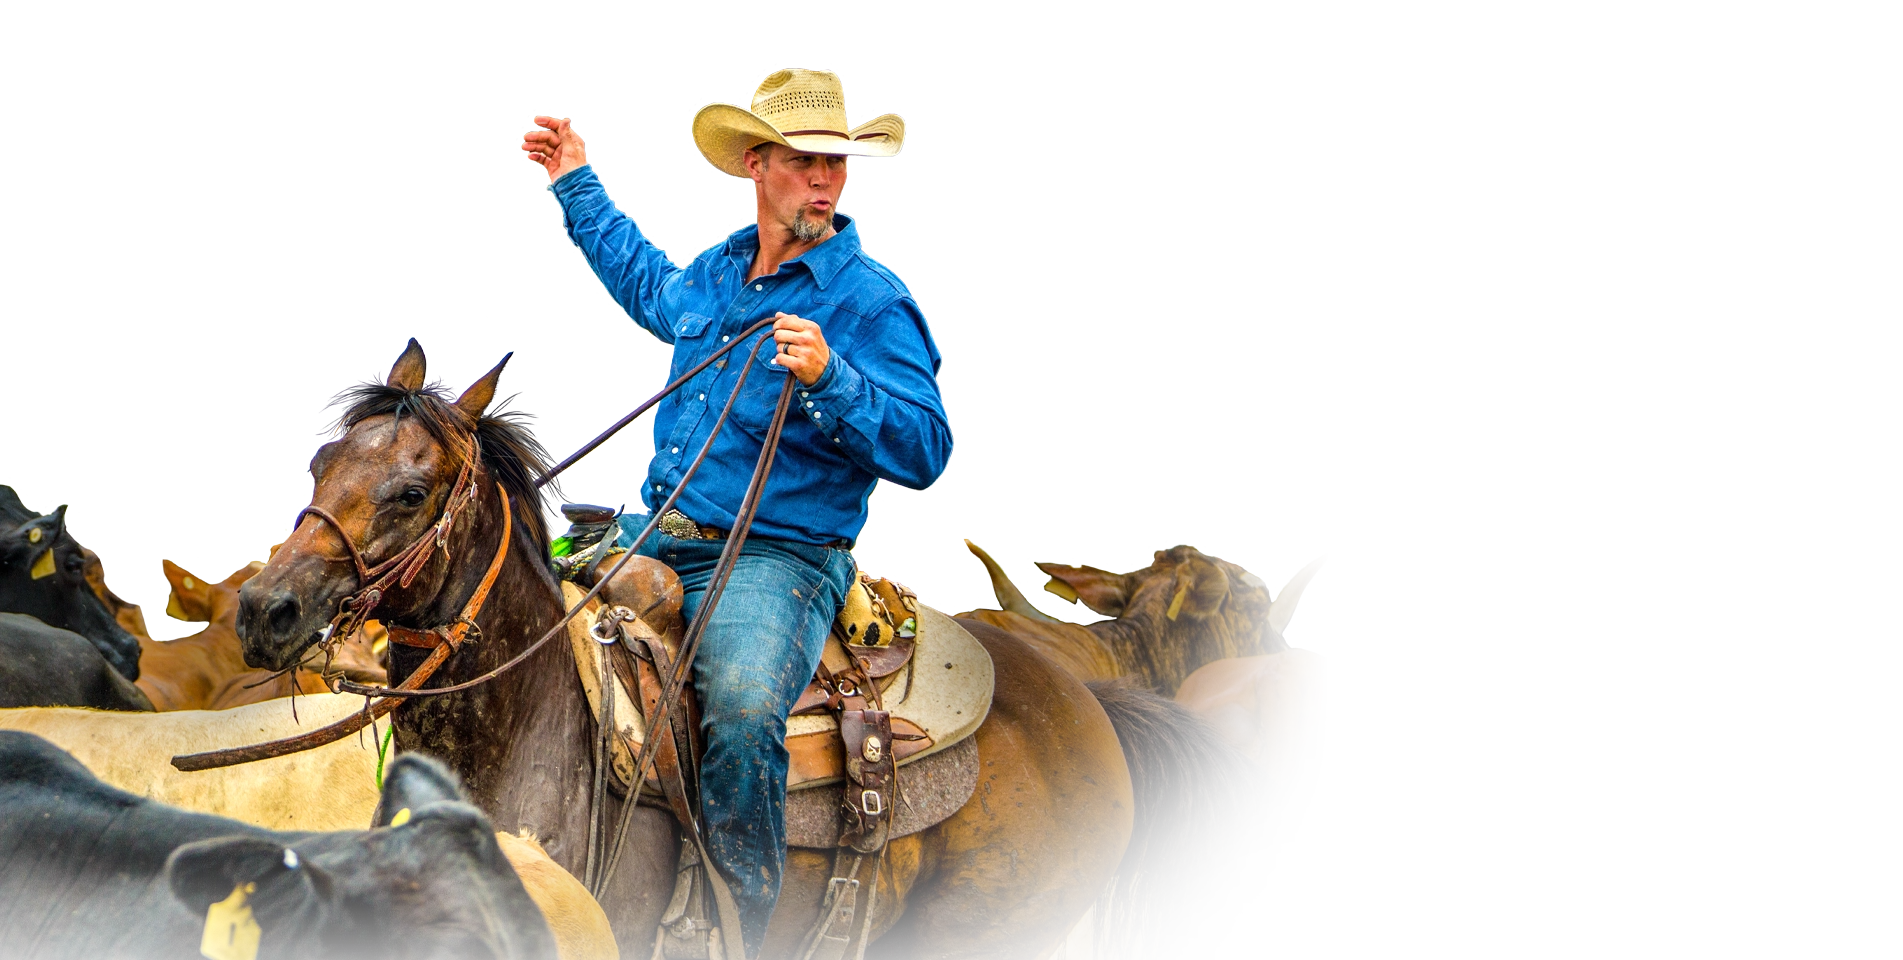 Bubba Thompson riding a horse with his hand extended in the air, and a determined look on his face.